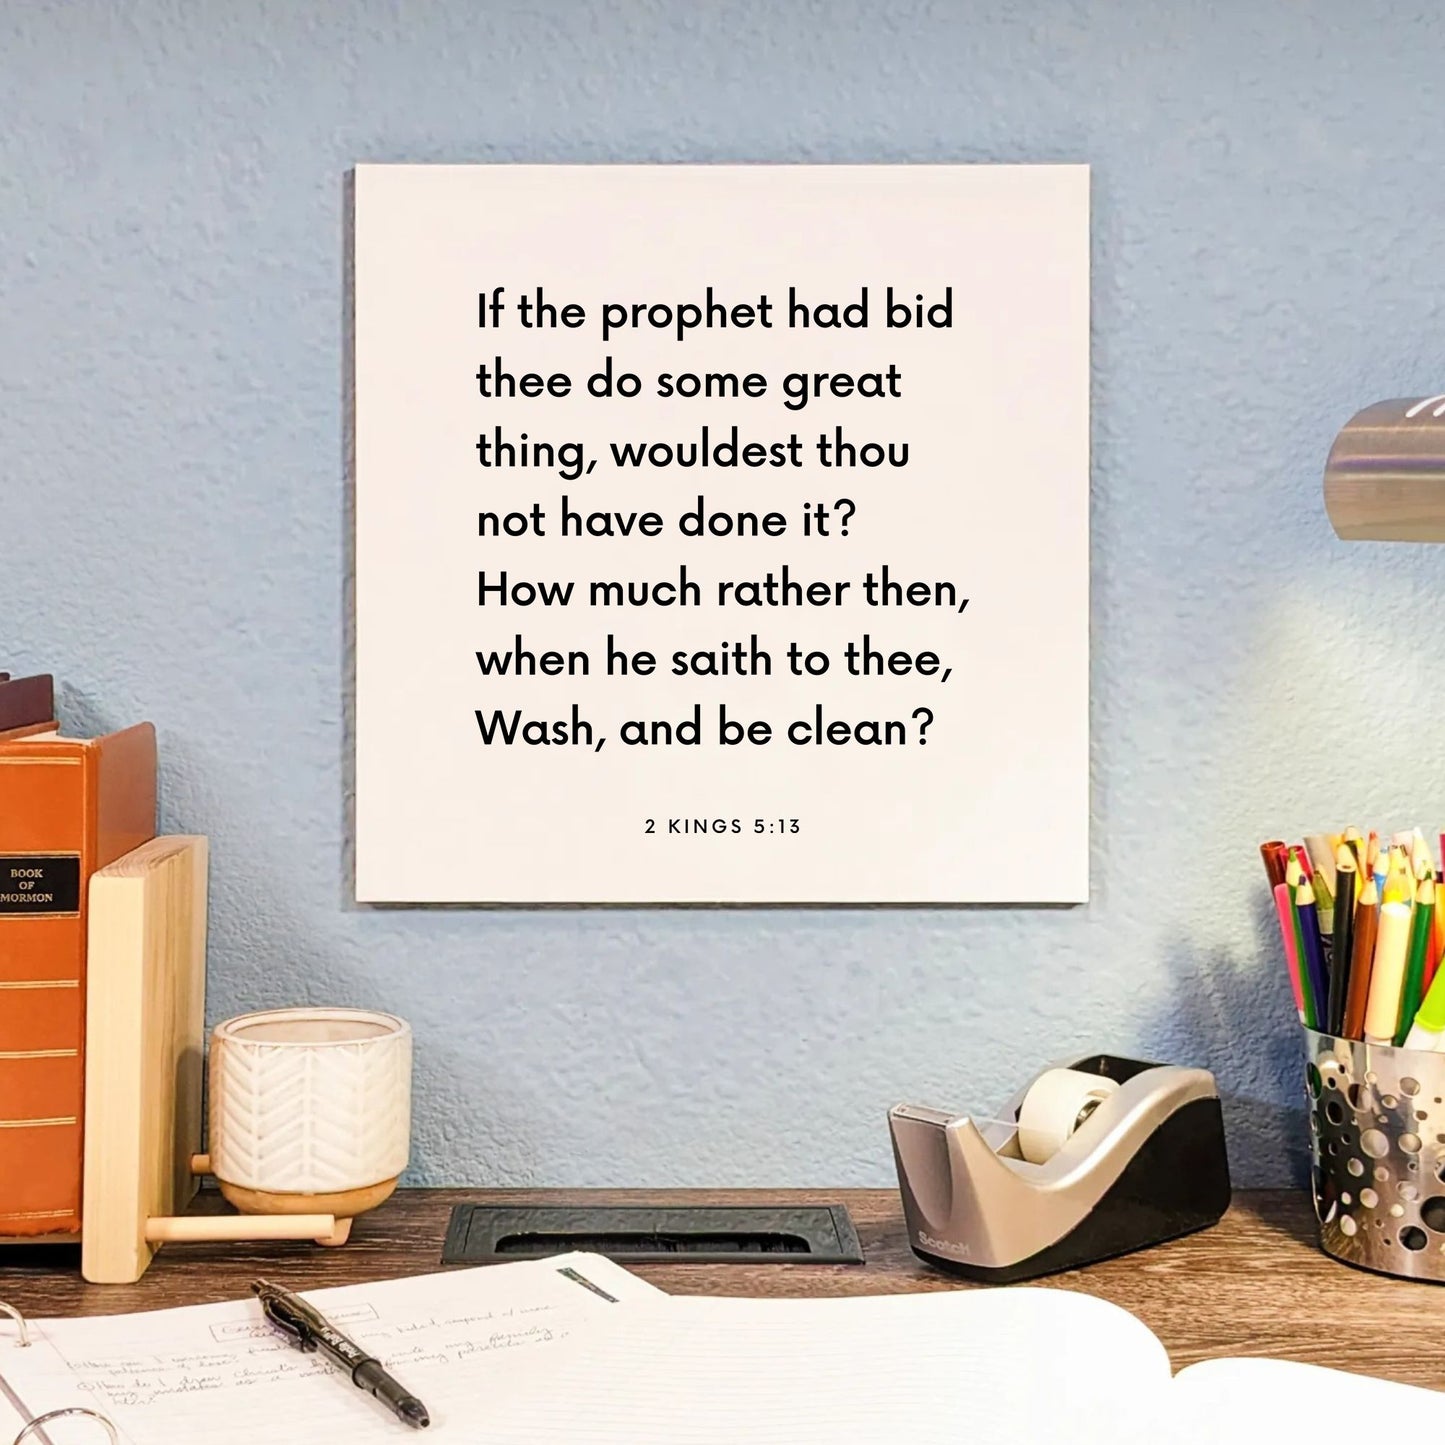 Desk mouting of the scripture tile for 2 Kings 5:13 - "If the prophet had bid thee do some great thing"